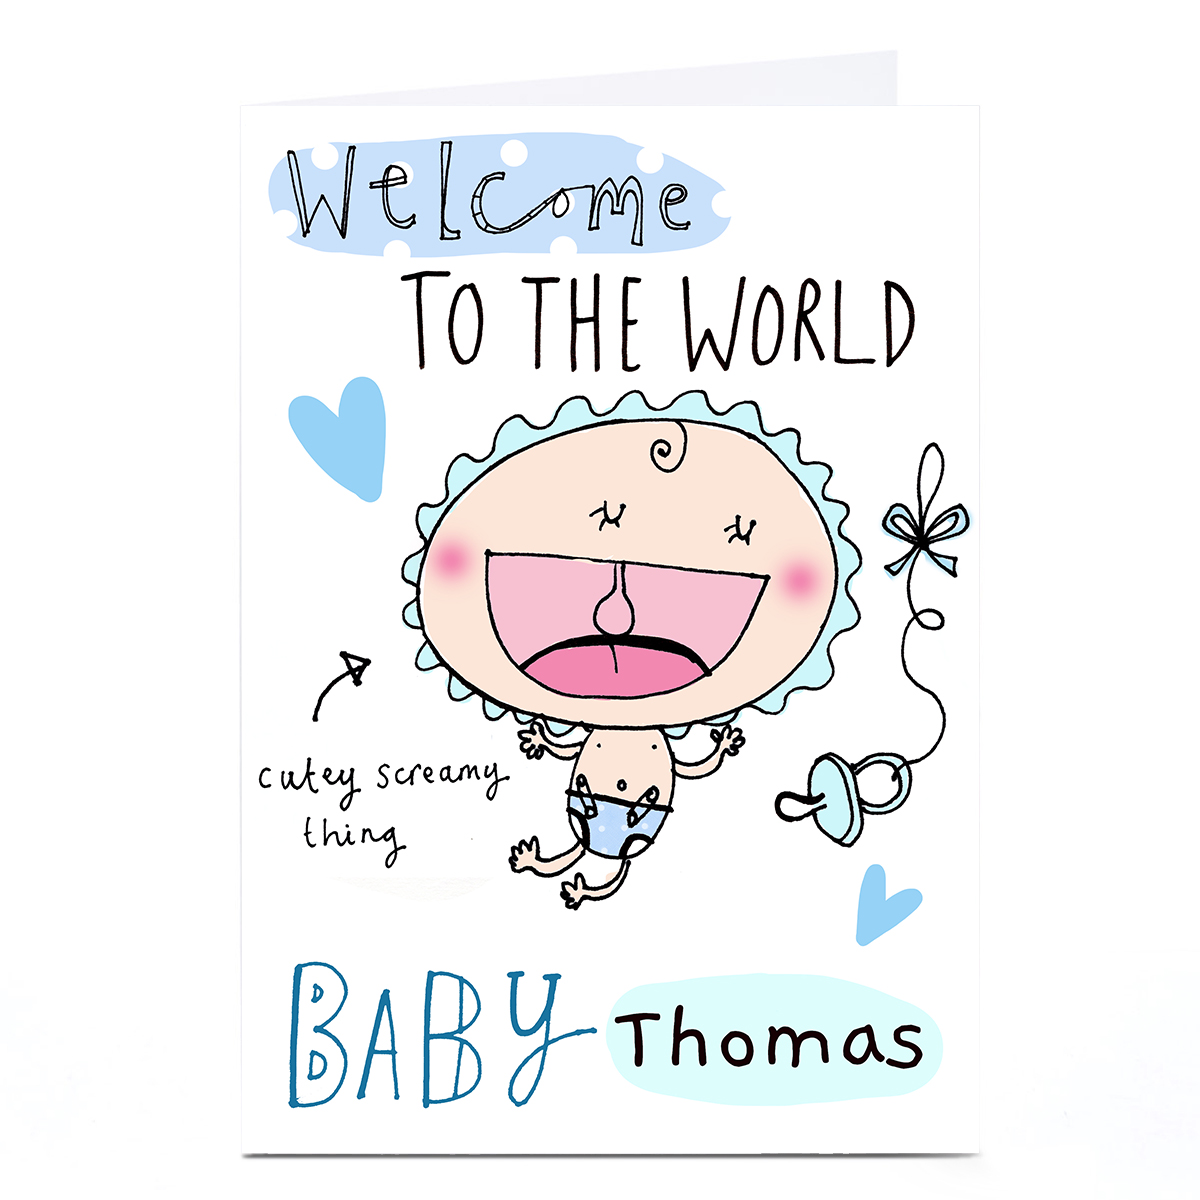 Personalised Lindsay Loves To Draw Card - Welcome To The World, Blue 